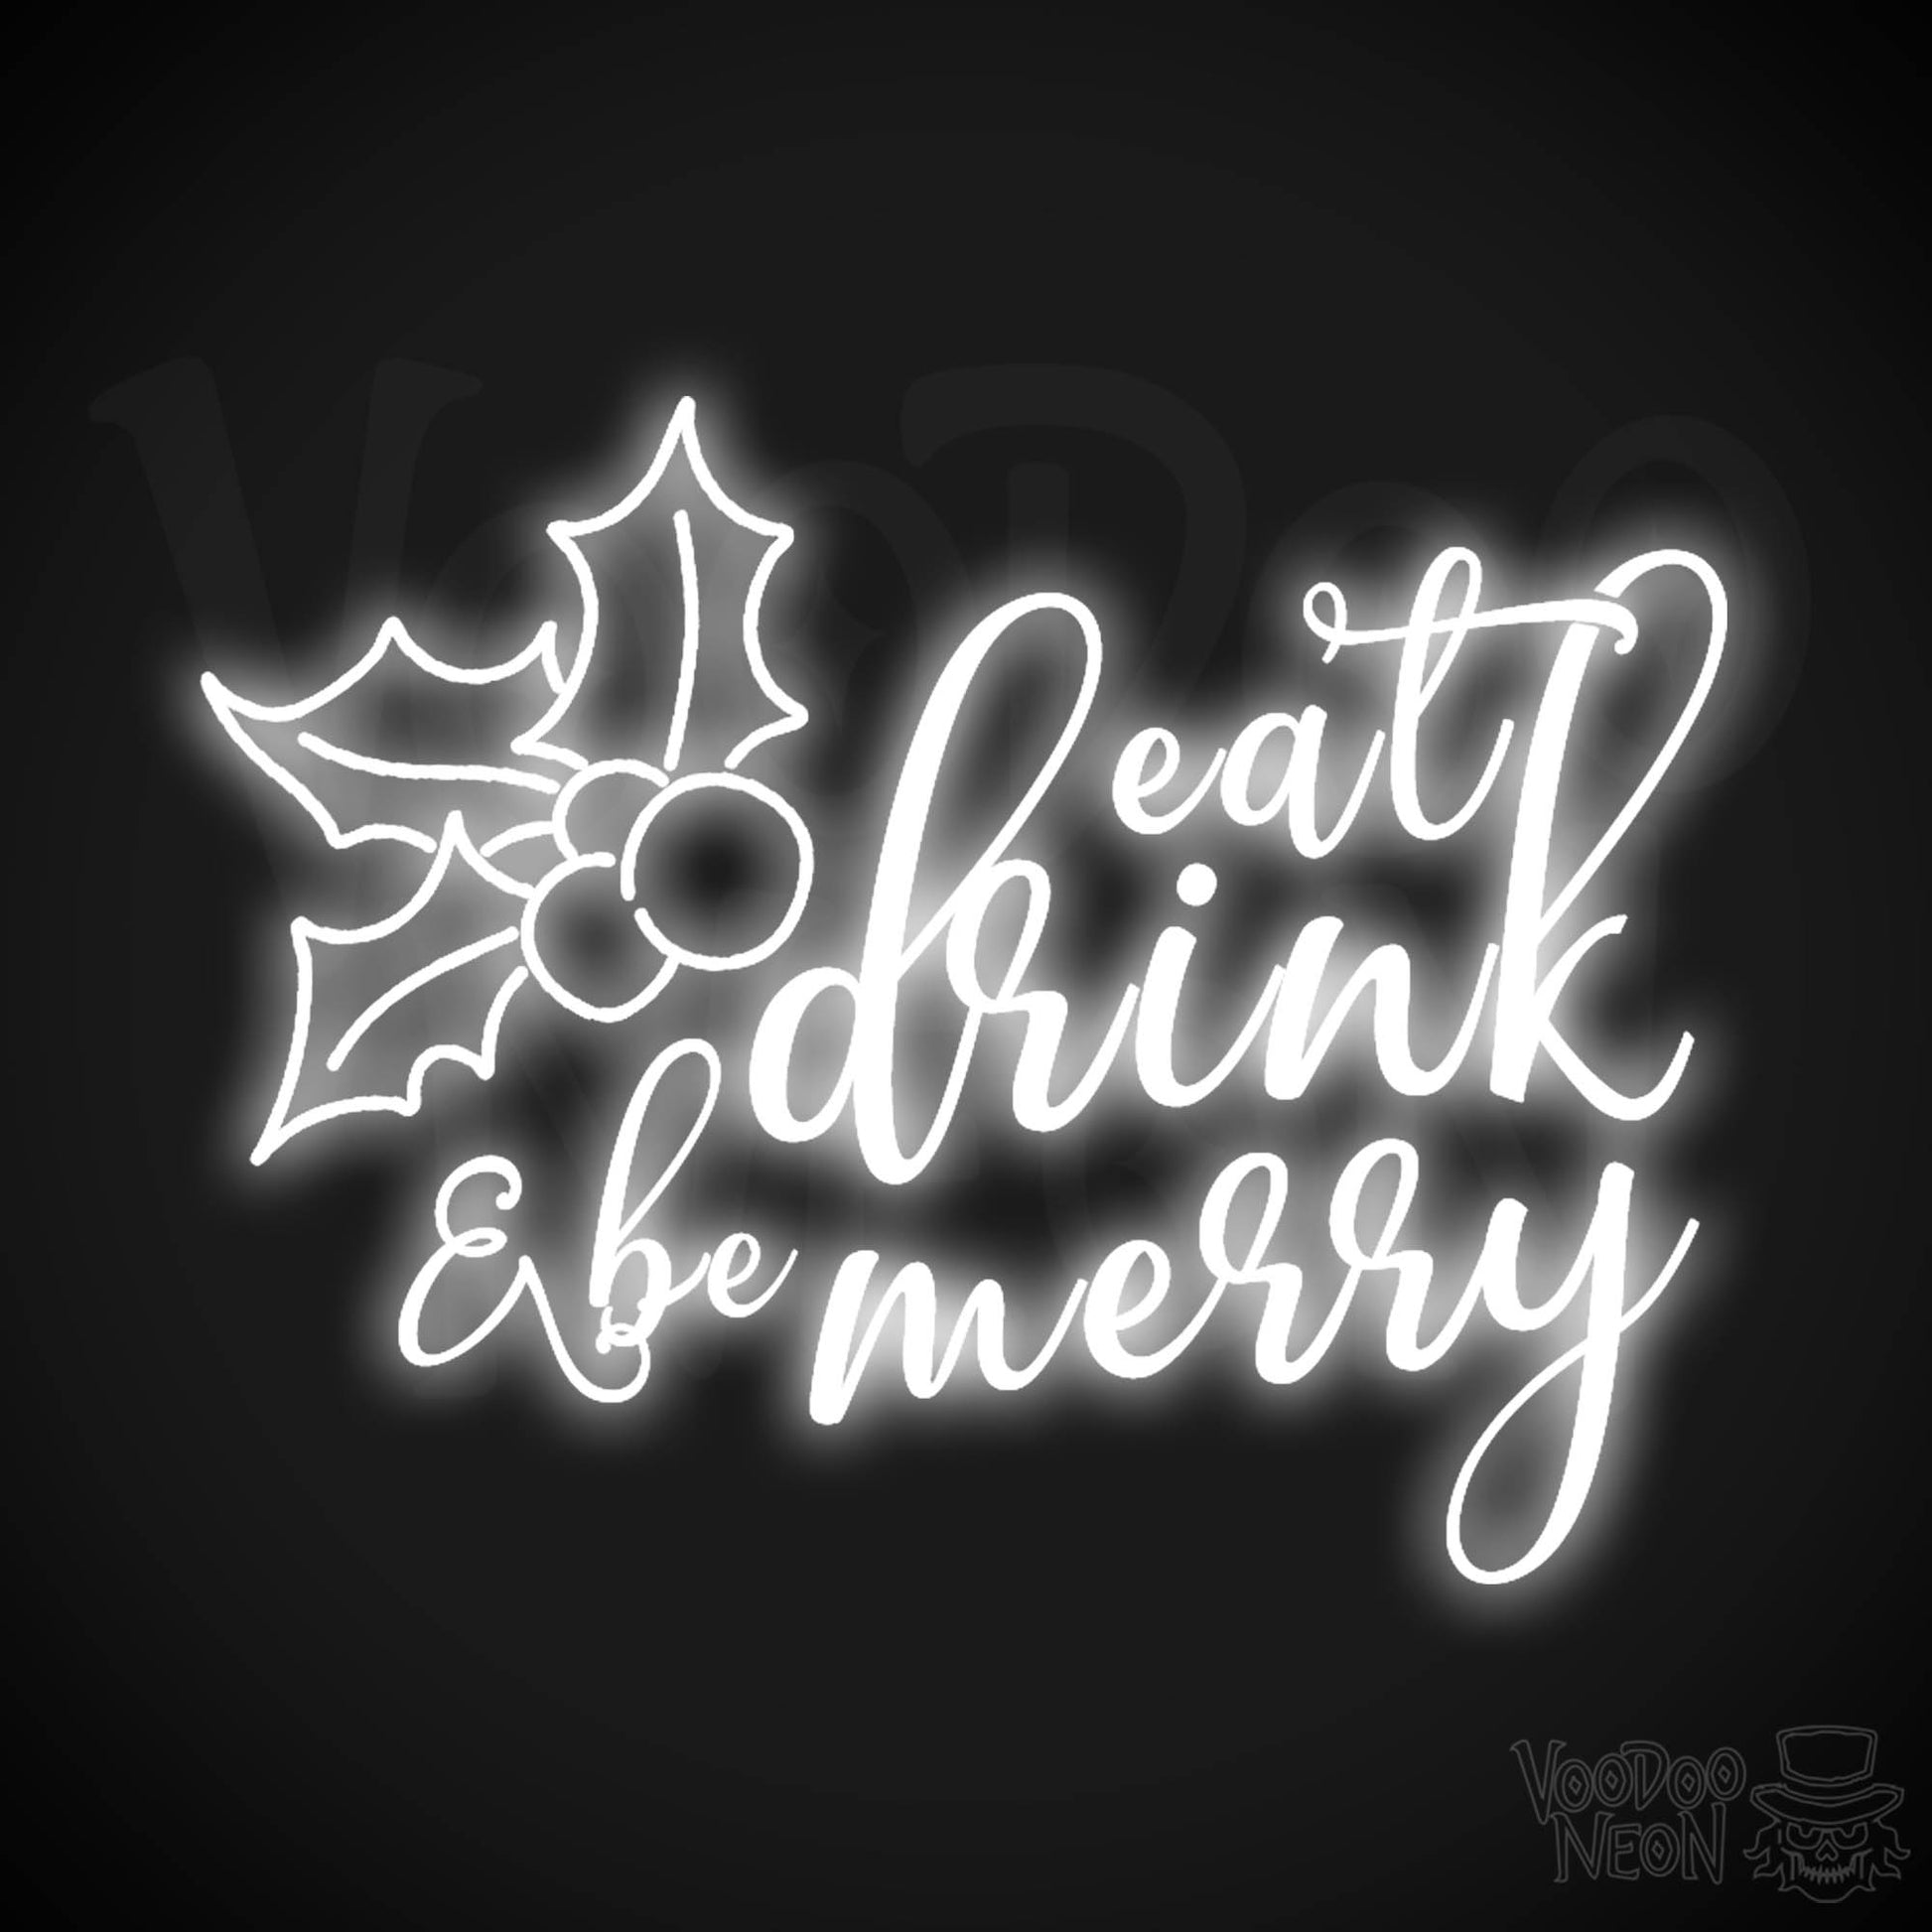 Eat Drink & Be Merry Neon Sign - Neon Eat Drink & Be Merry Sign - Color White